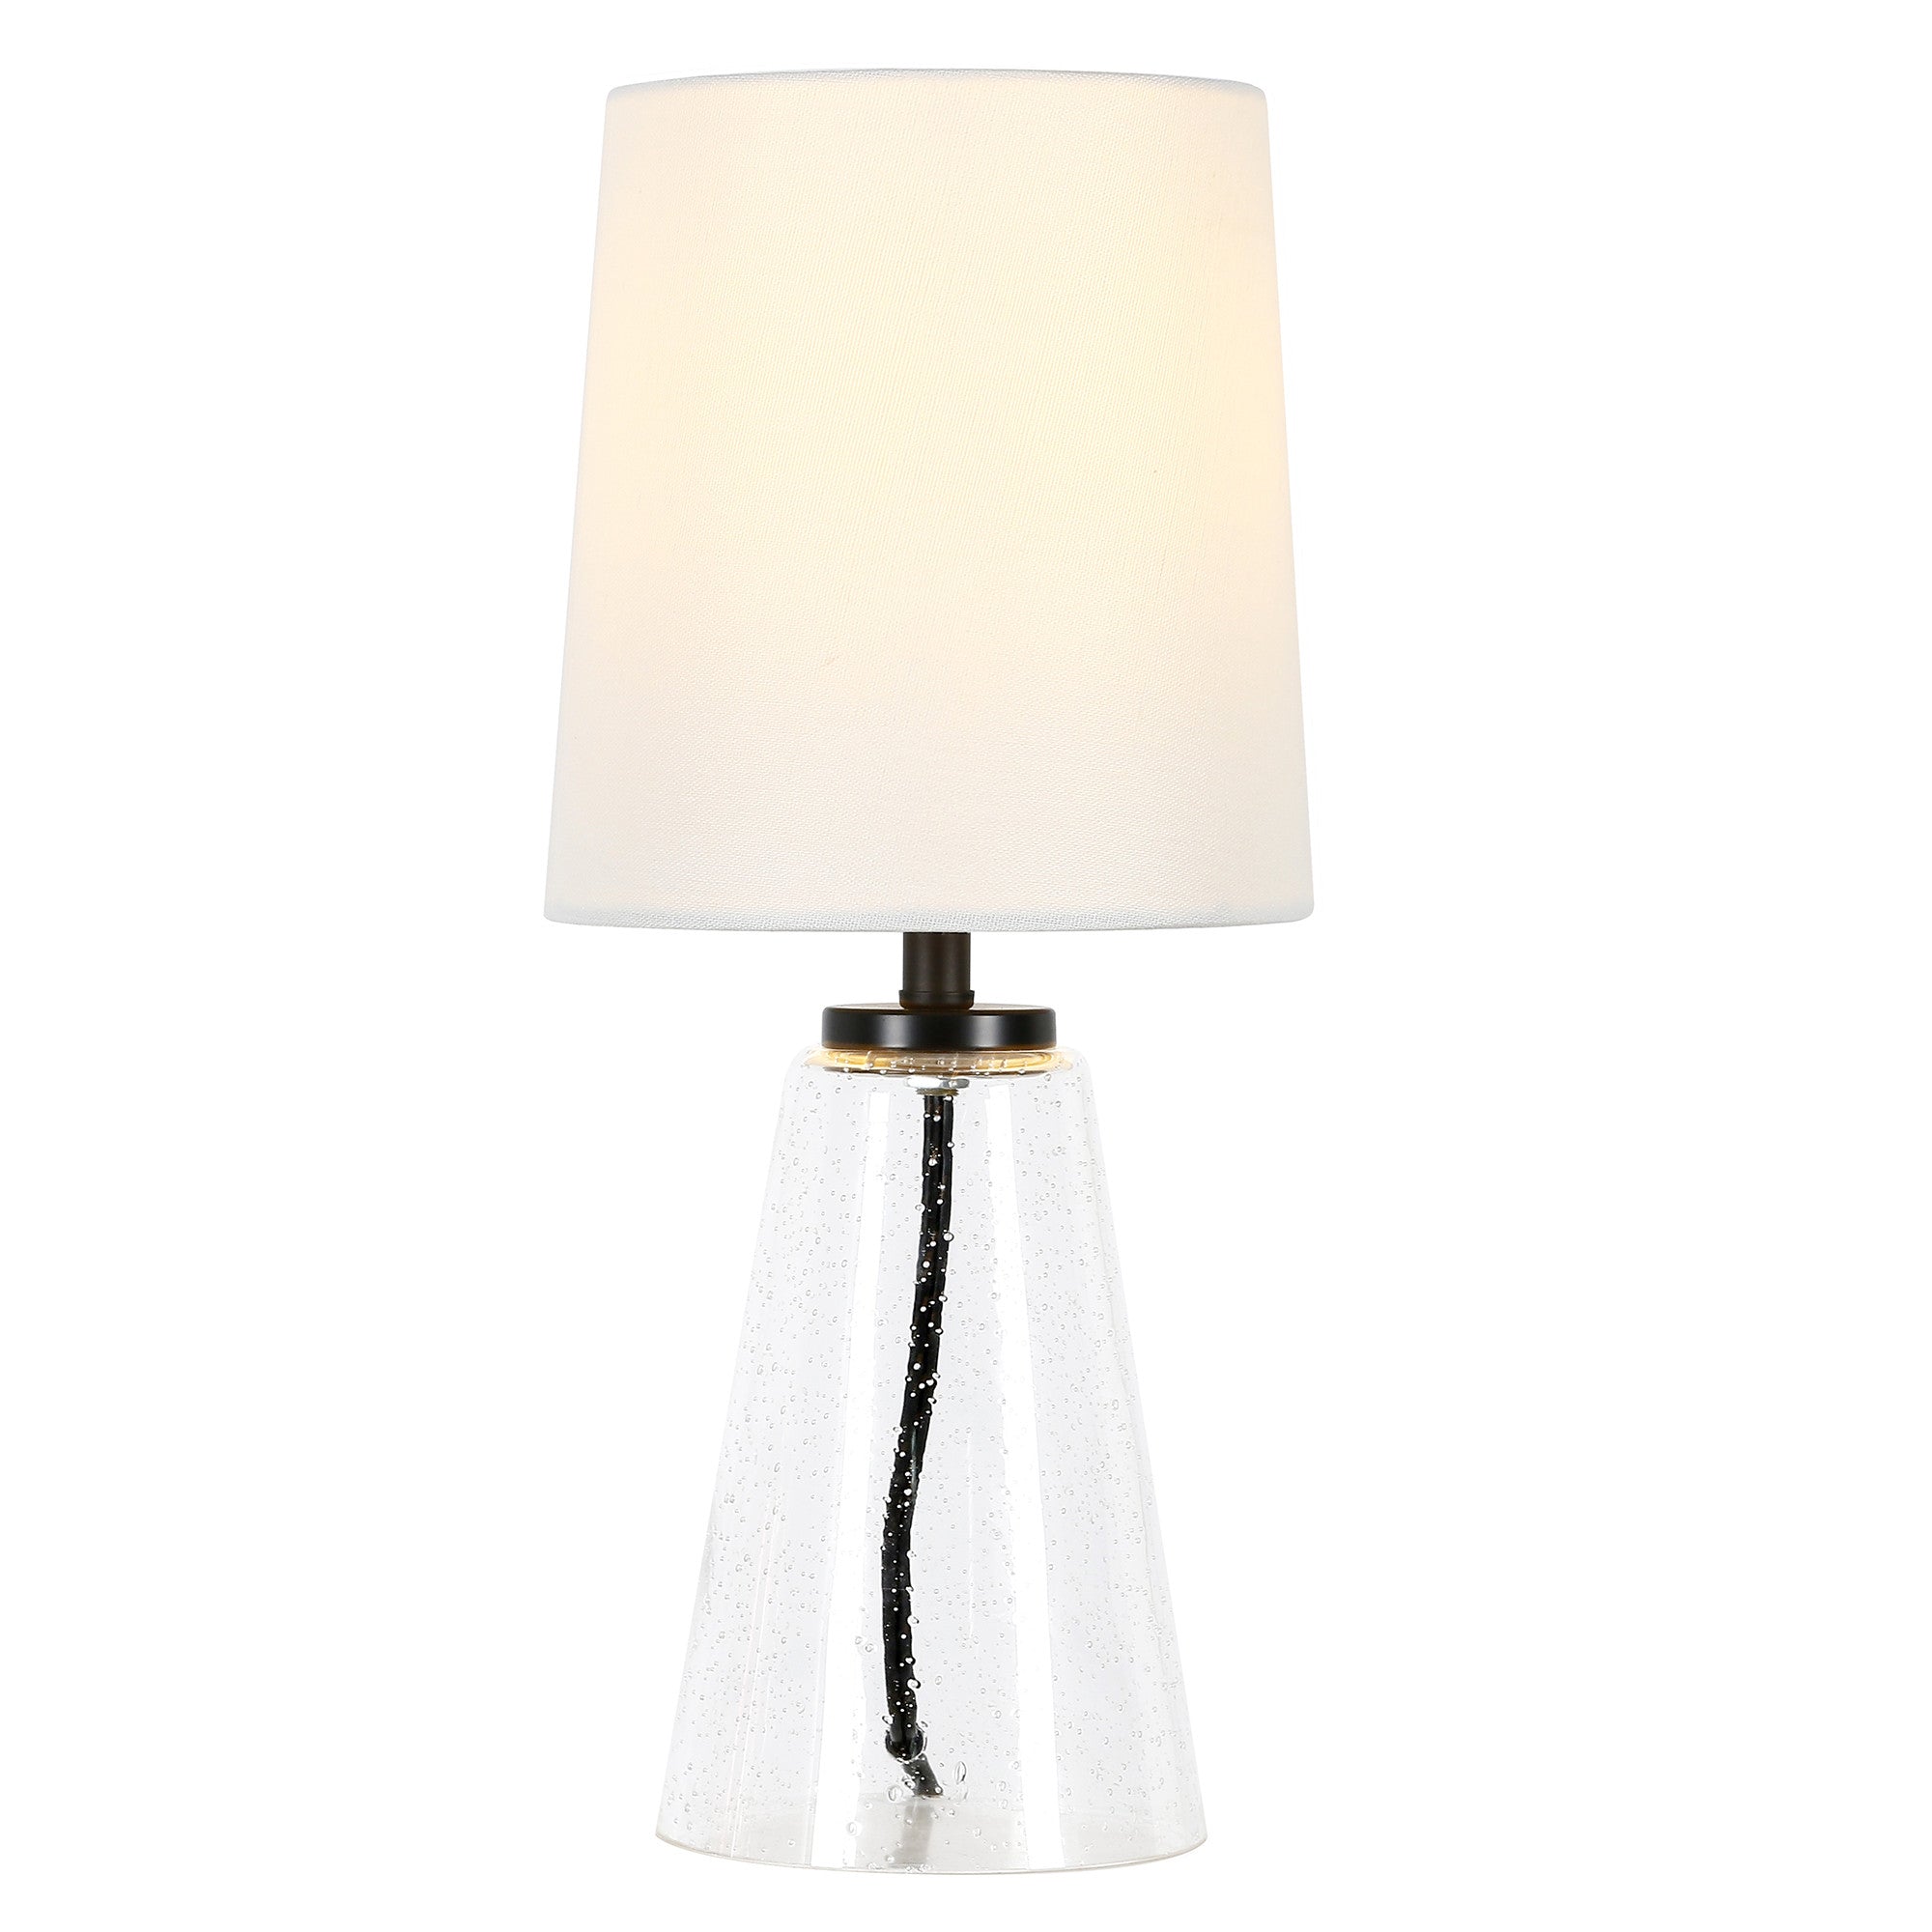 16" Clear Glass Geometric Table Lamp With White Drum Shade